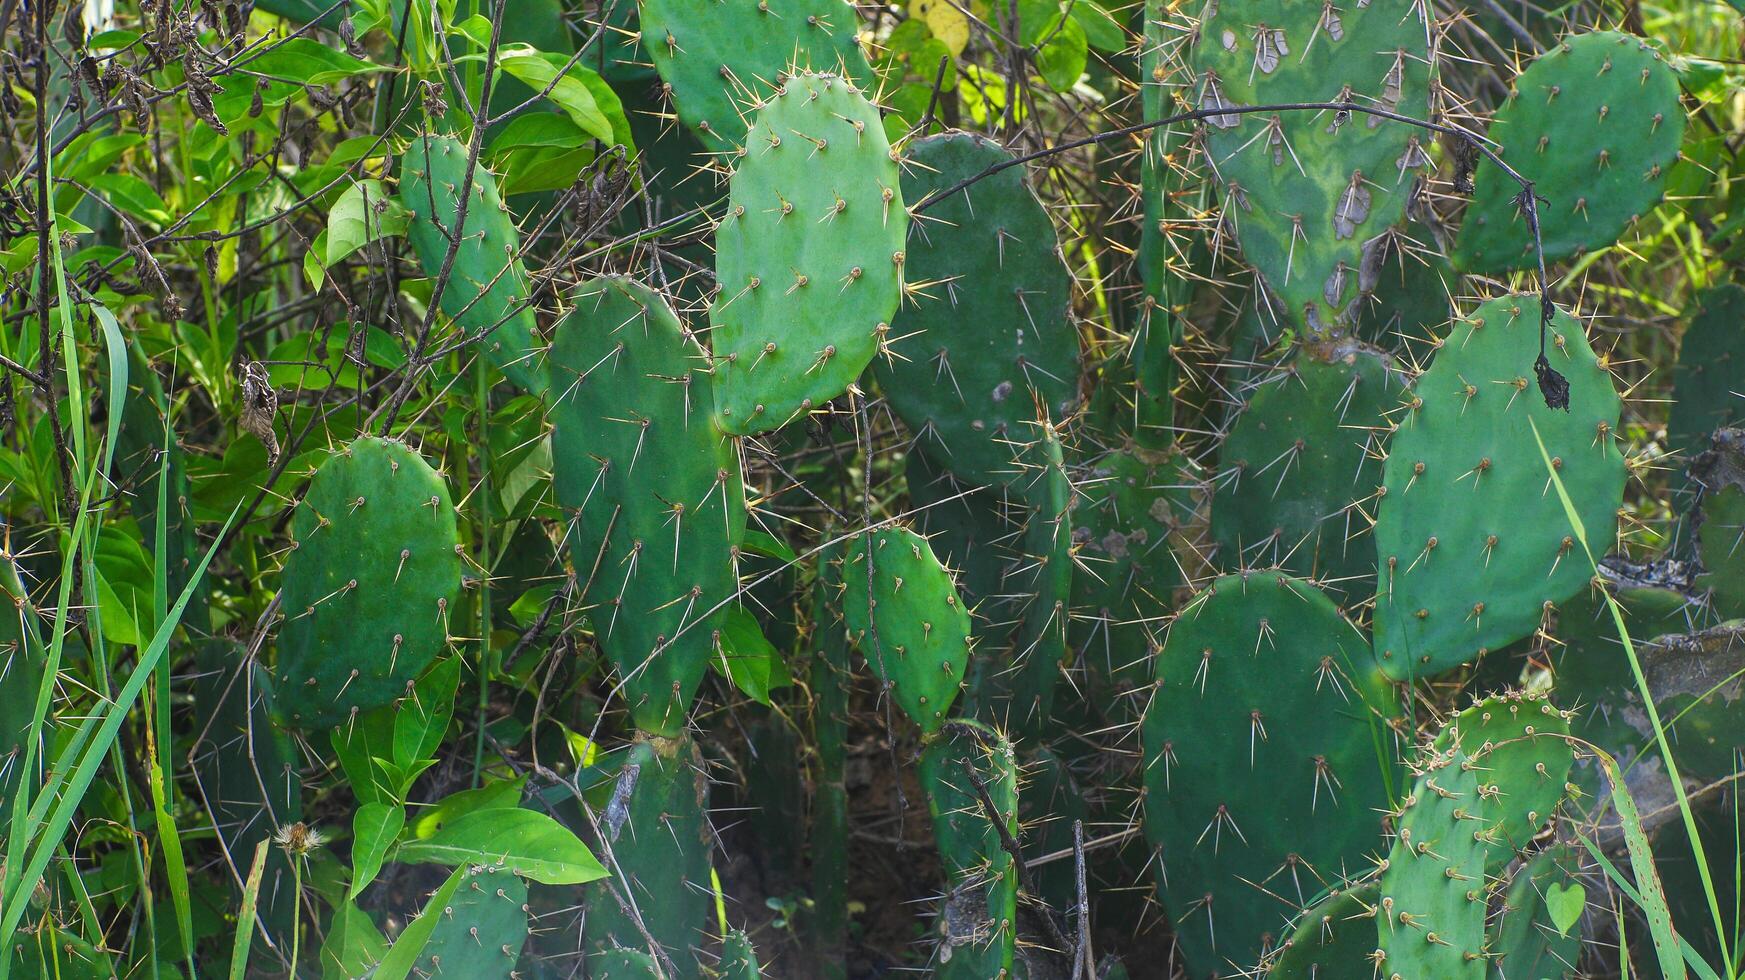 Spiny cactus plants that grow widely in tropical areas photo